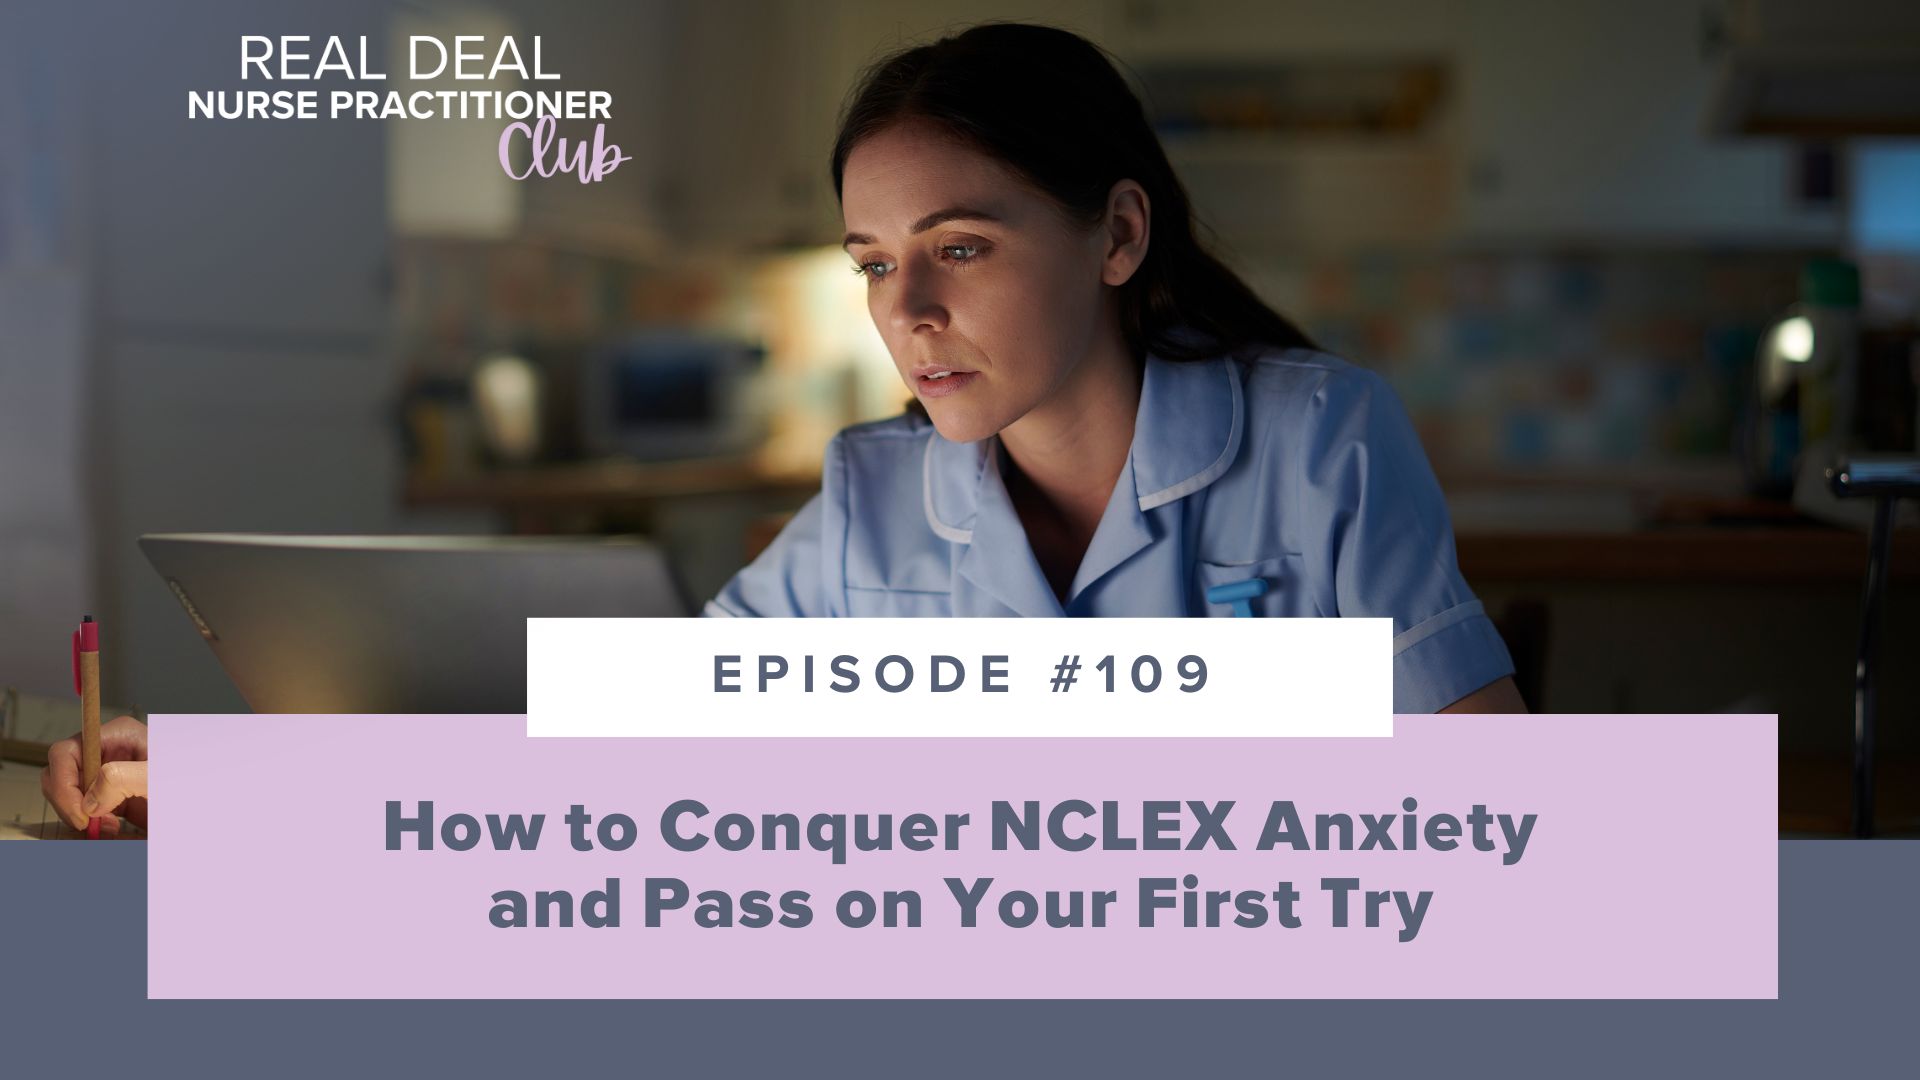 SMNP Blog - Ep #109: How to Conquer NCLEX Anxiety and Pass on Your First Try